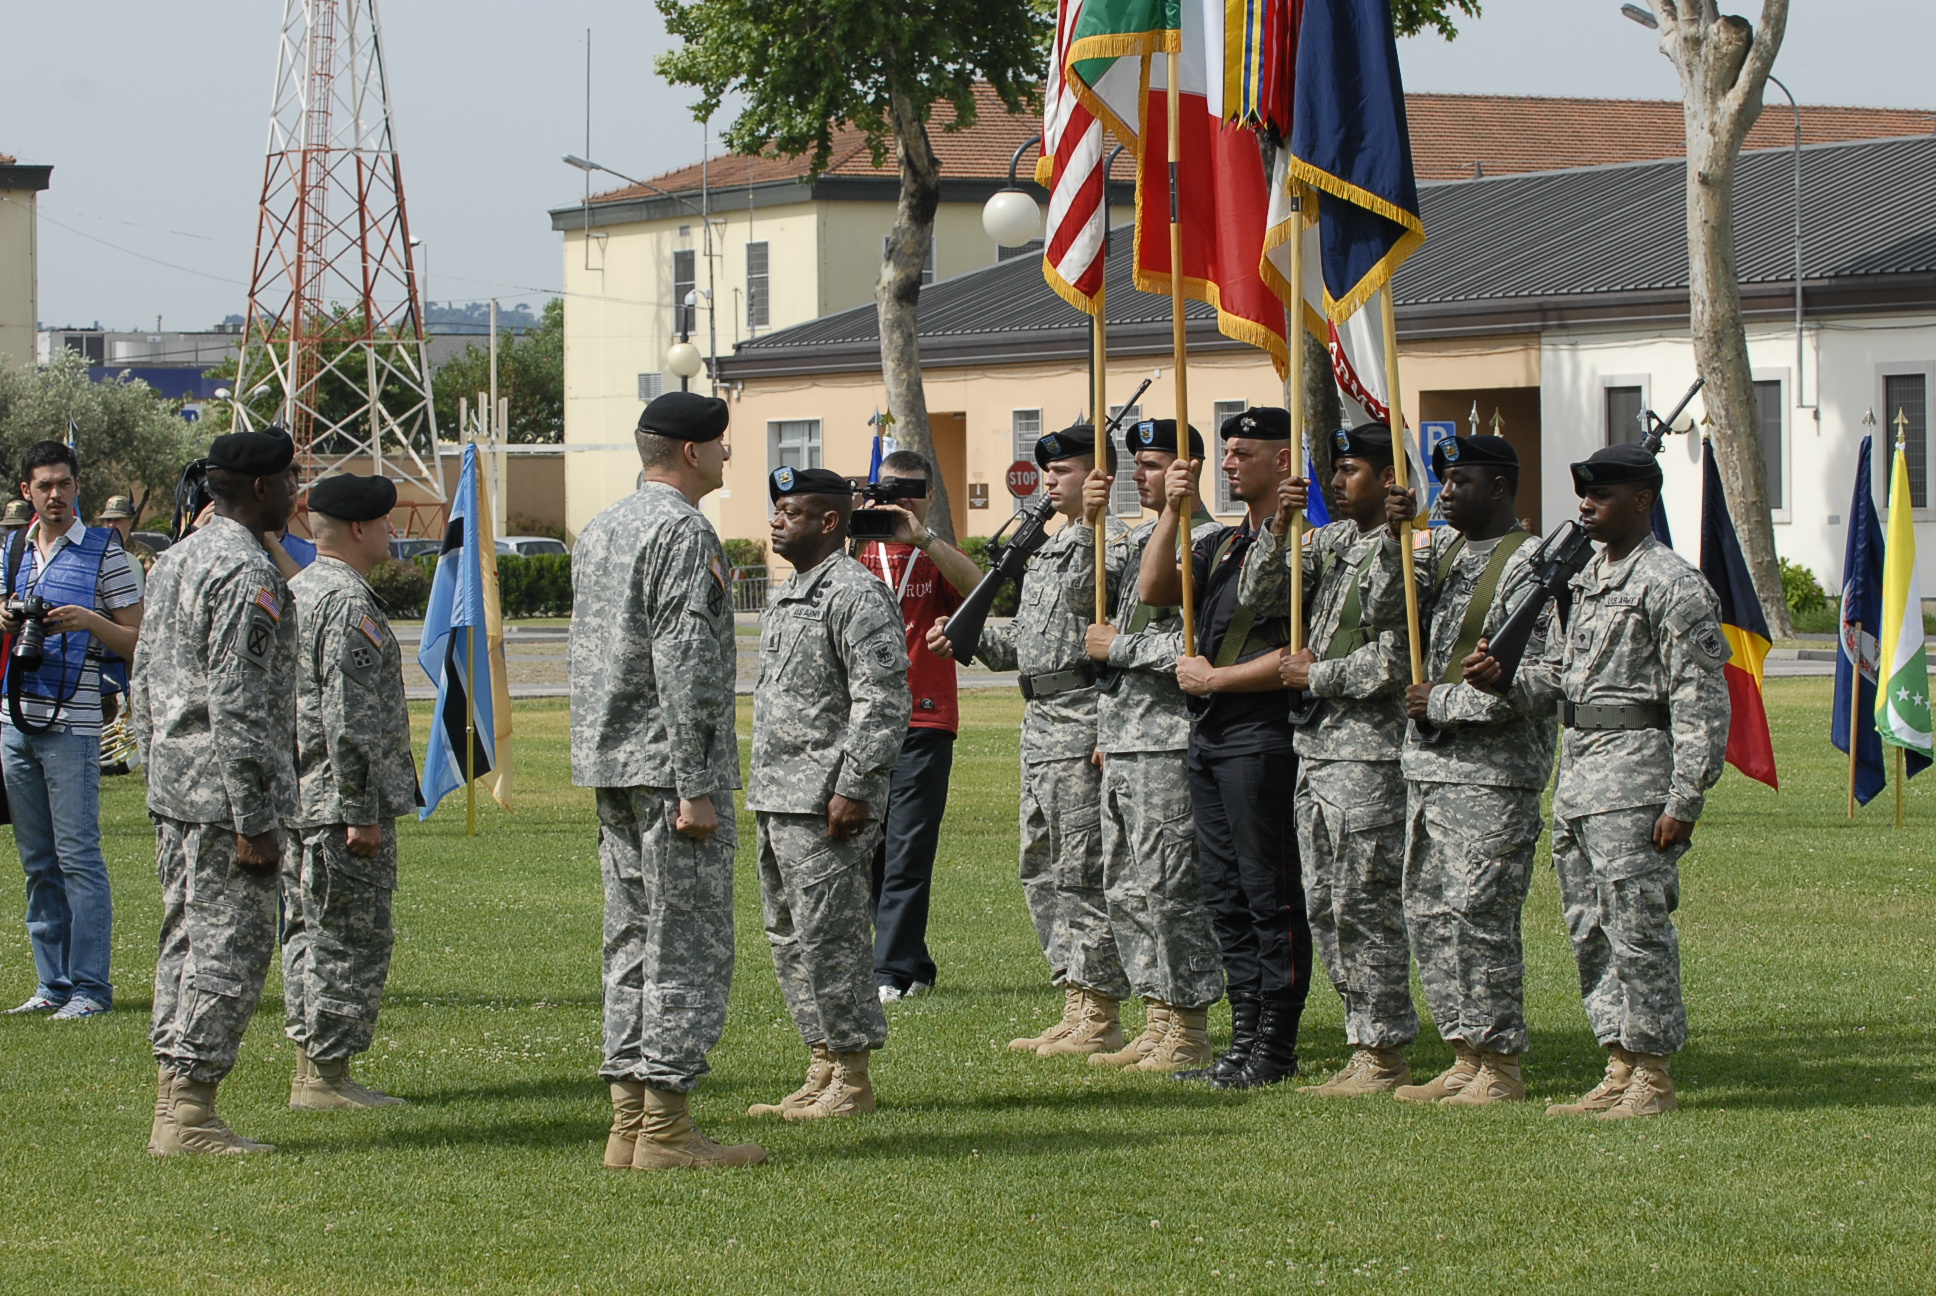 military men and women from the army holding flags